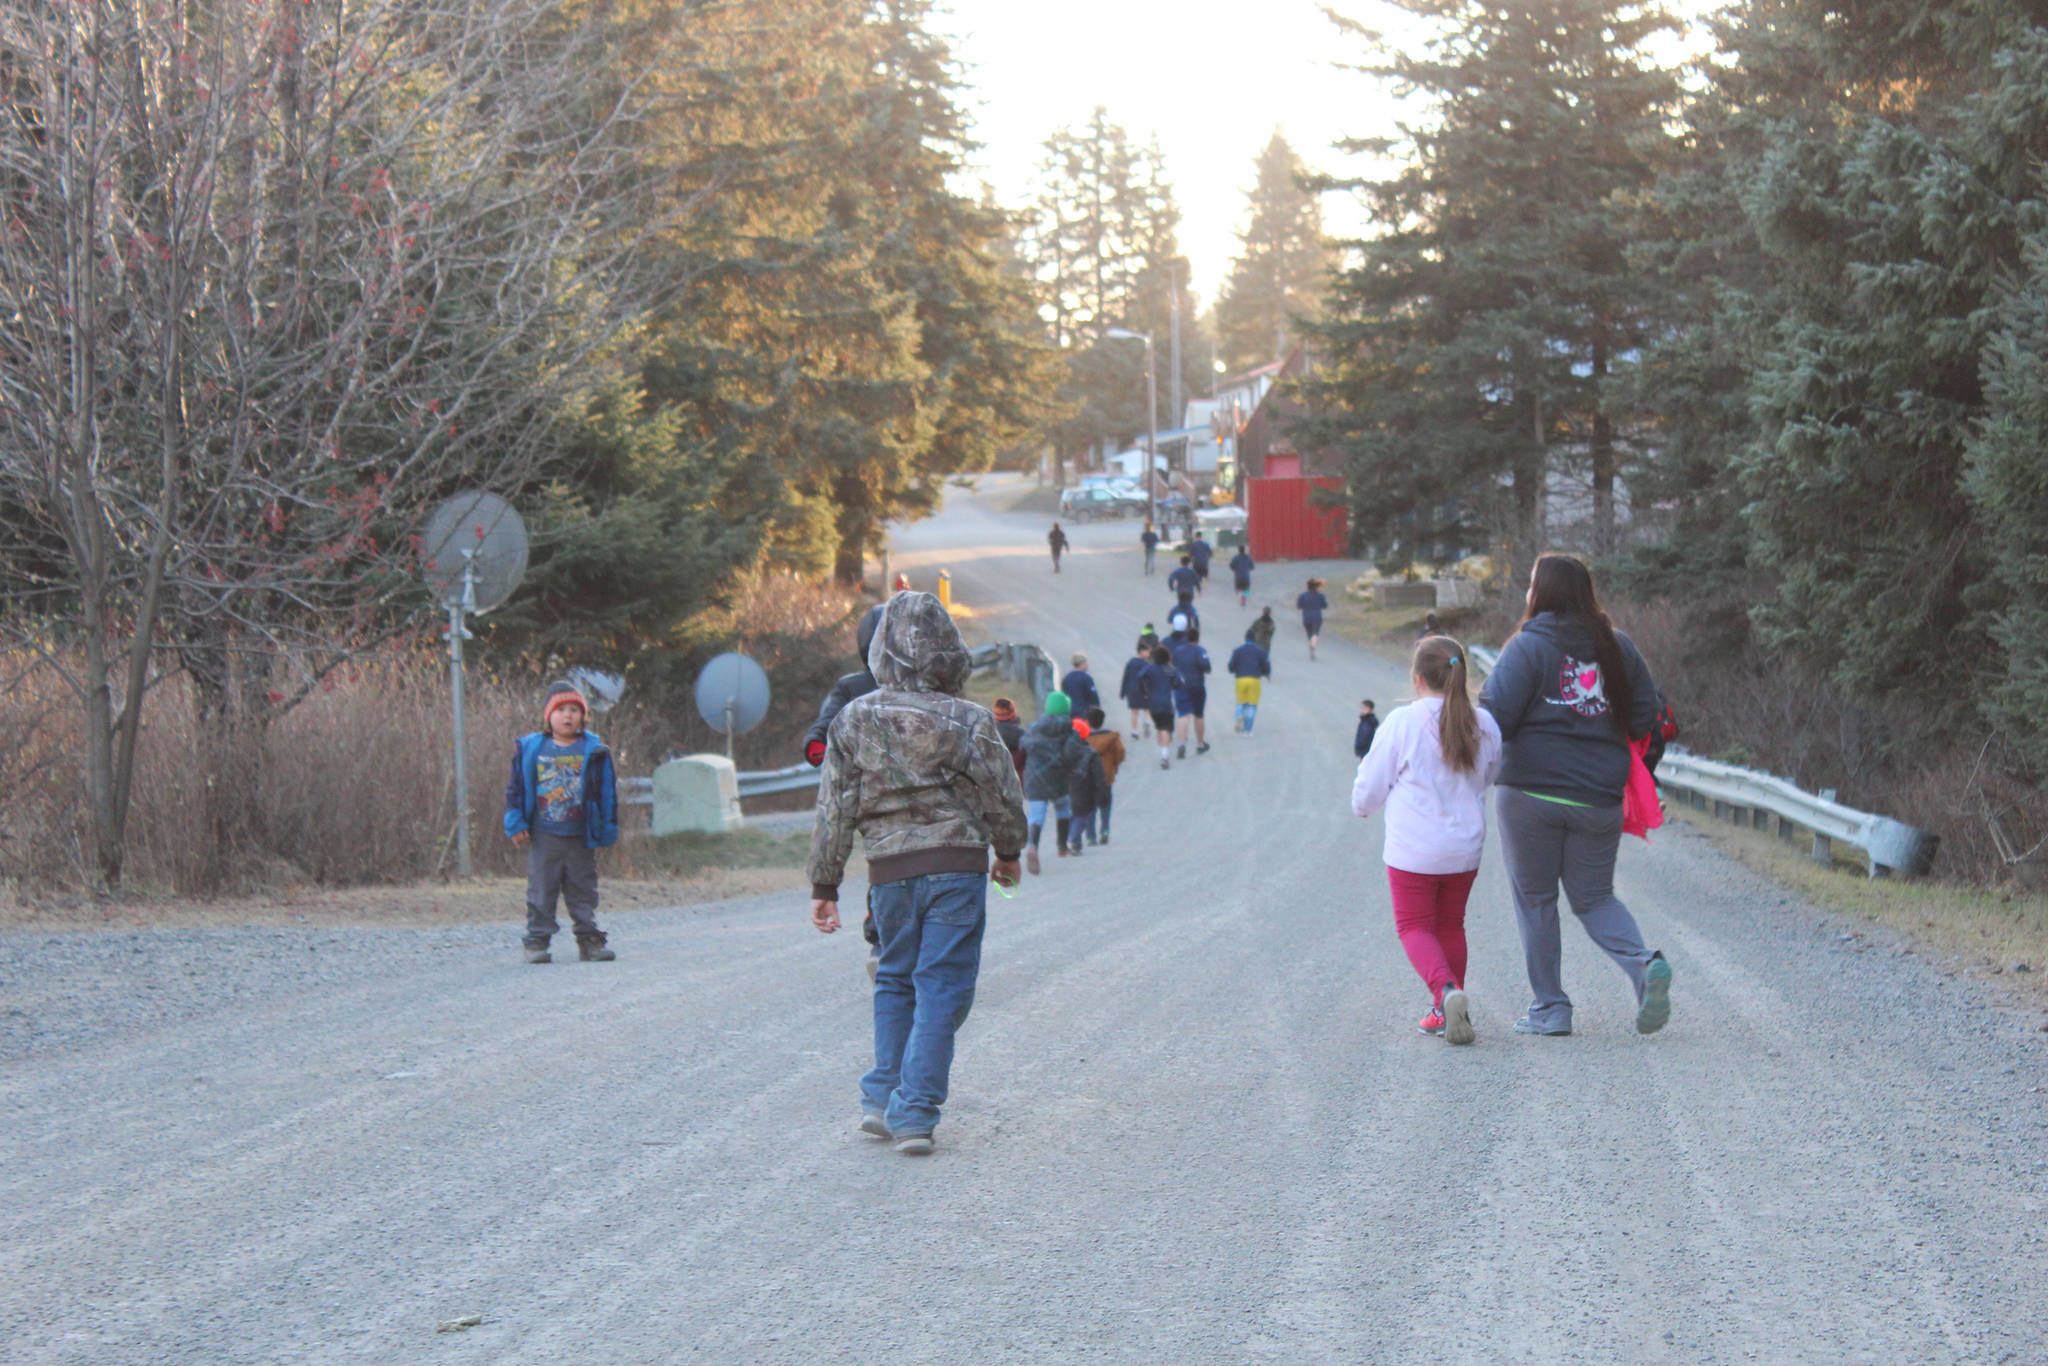 Students and faculty from Port Graham School run through the village as part of a presentation by visiting human rights lawyer Chris Mburu, who works for the United Nations, and Kimani Nyambura on Thursday, Nov. 16, 2017 in Port Graham, Alaska. The pair visited and spoke to several Kenai Peninsula schools on Nov. 16-17 about their journey through education from a small village in Kenya and Mburu’s creation of a foundation to help Kenyan children go to school. (Photo by Megan Pacer/Homer News)